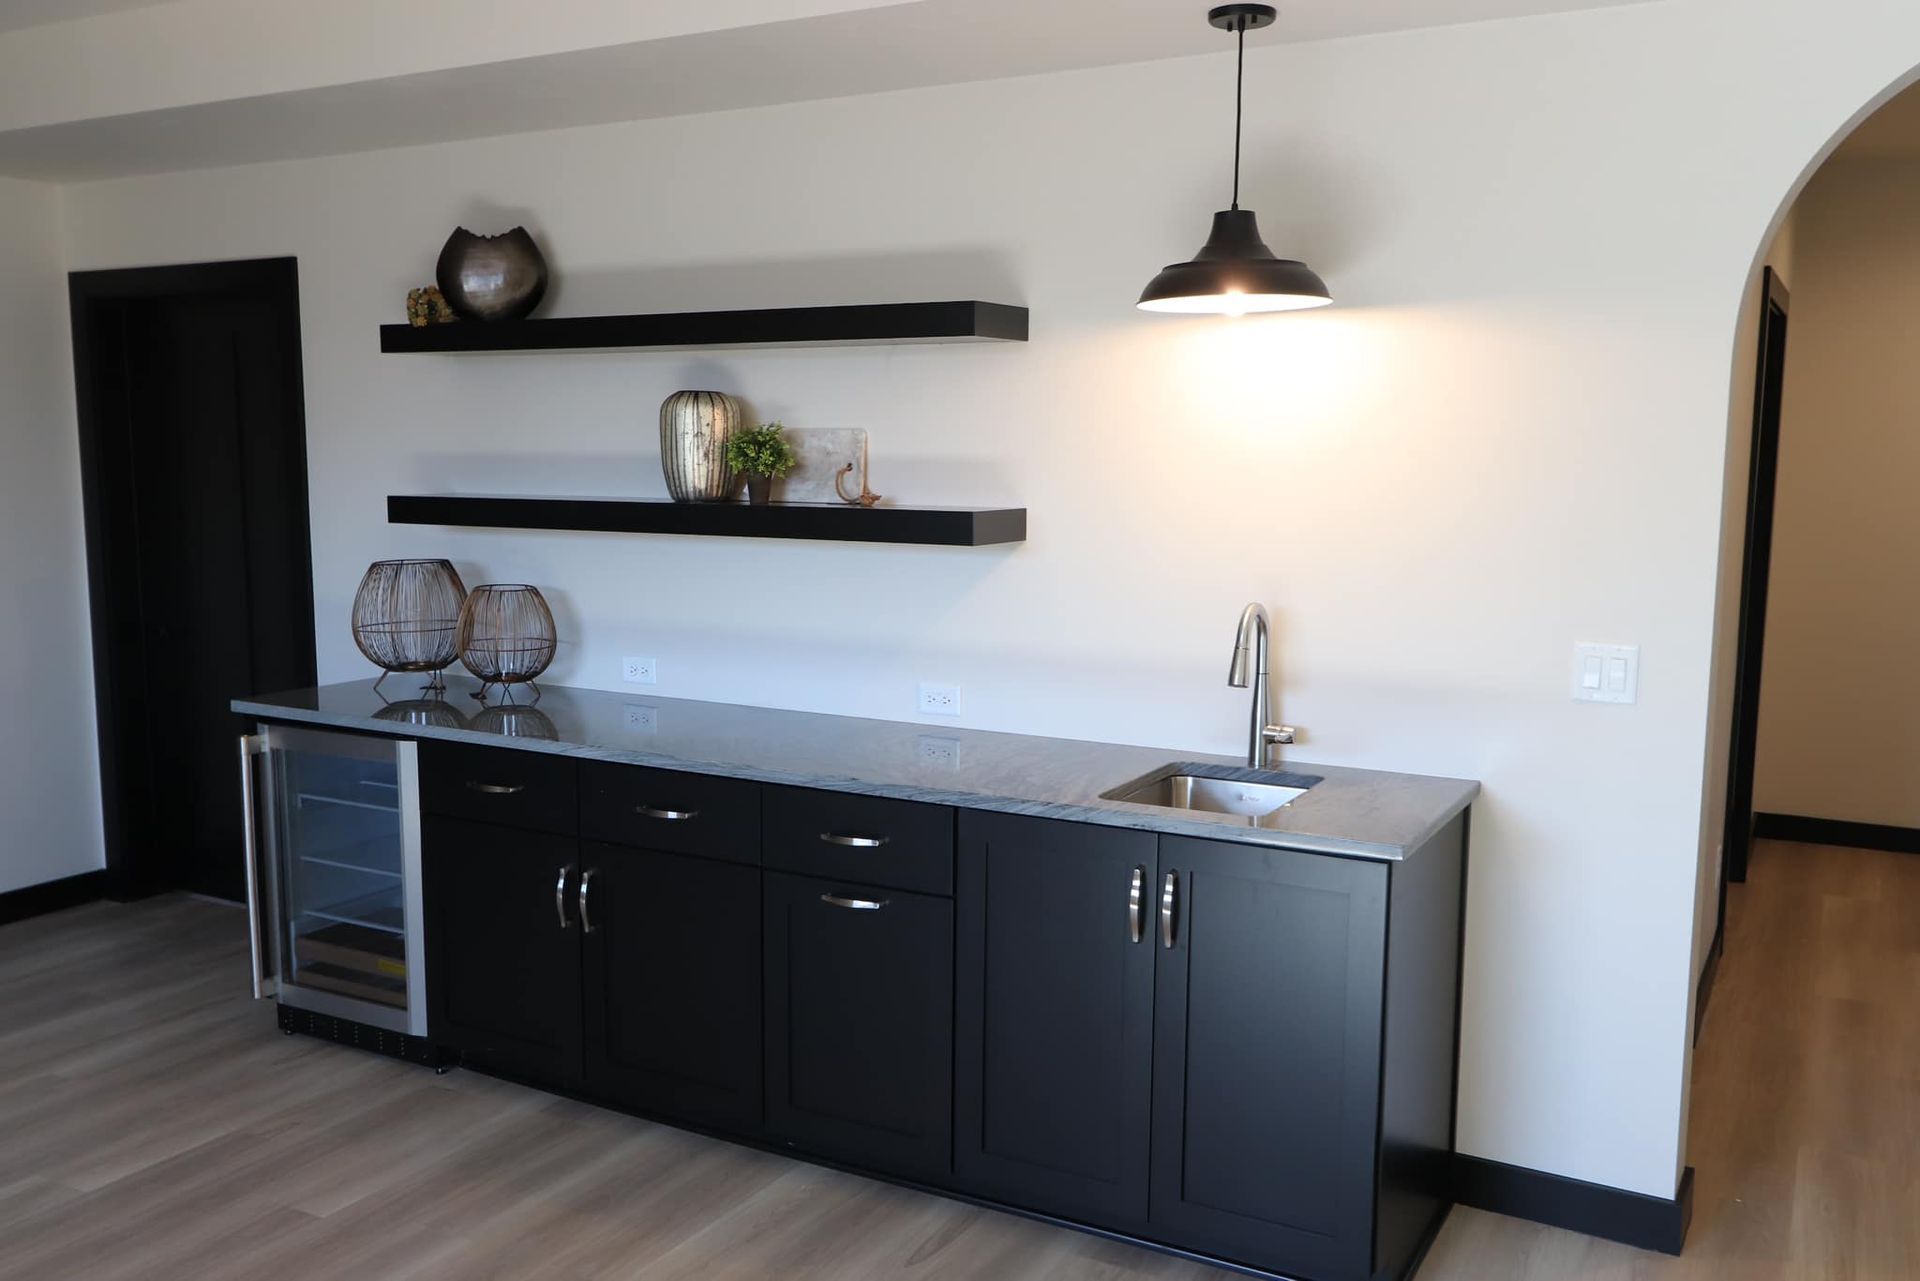 A kitchen with black cabinets and a sink